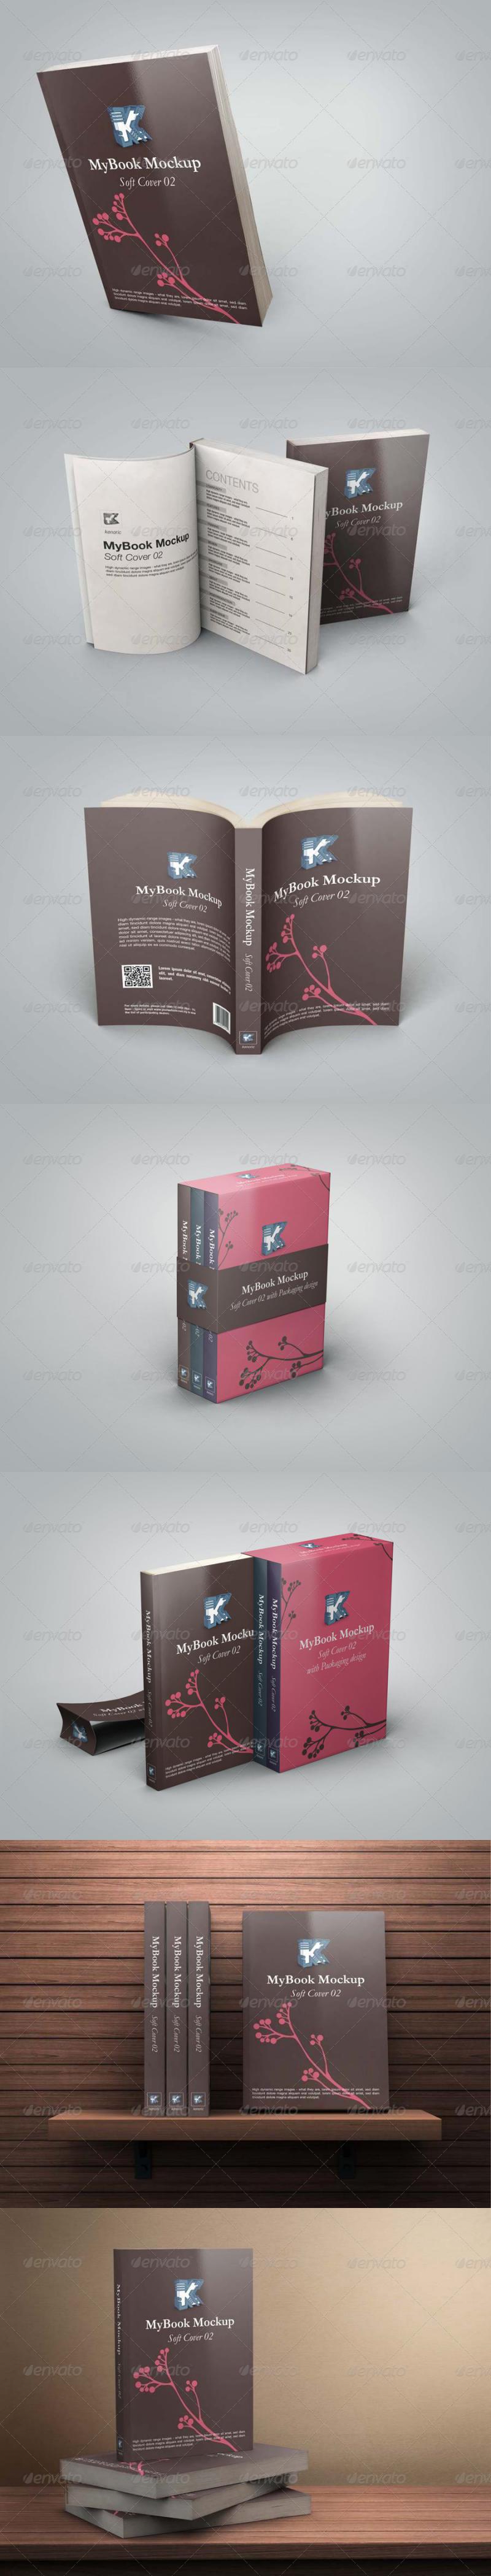 Soft Cover 02 Mock-up